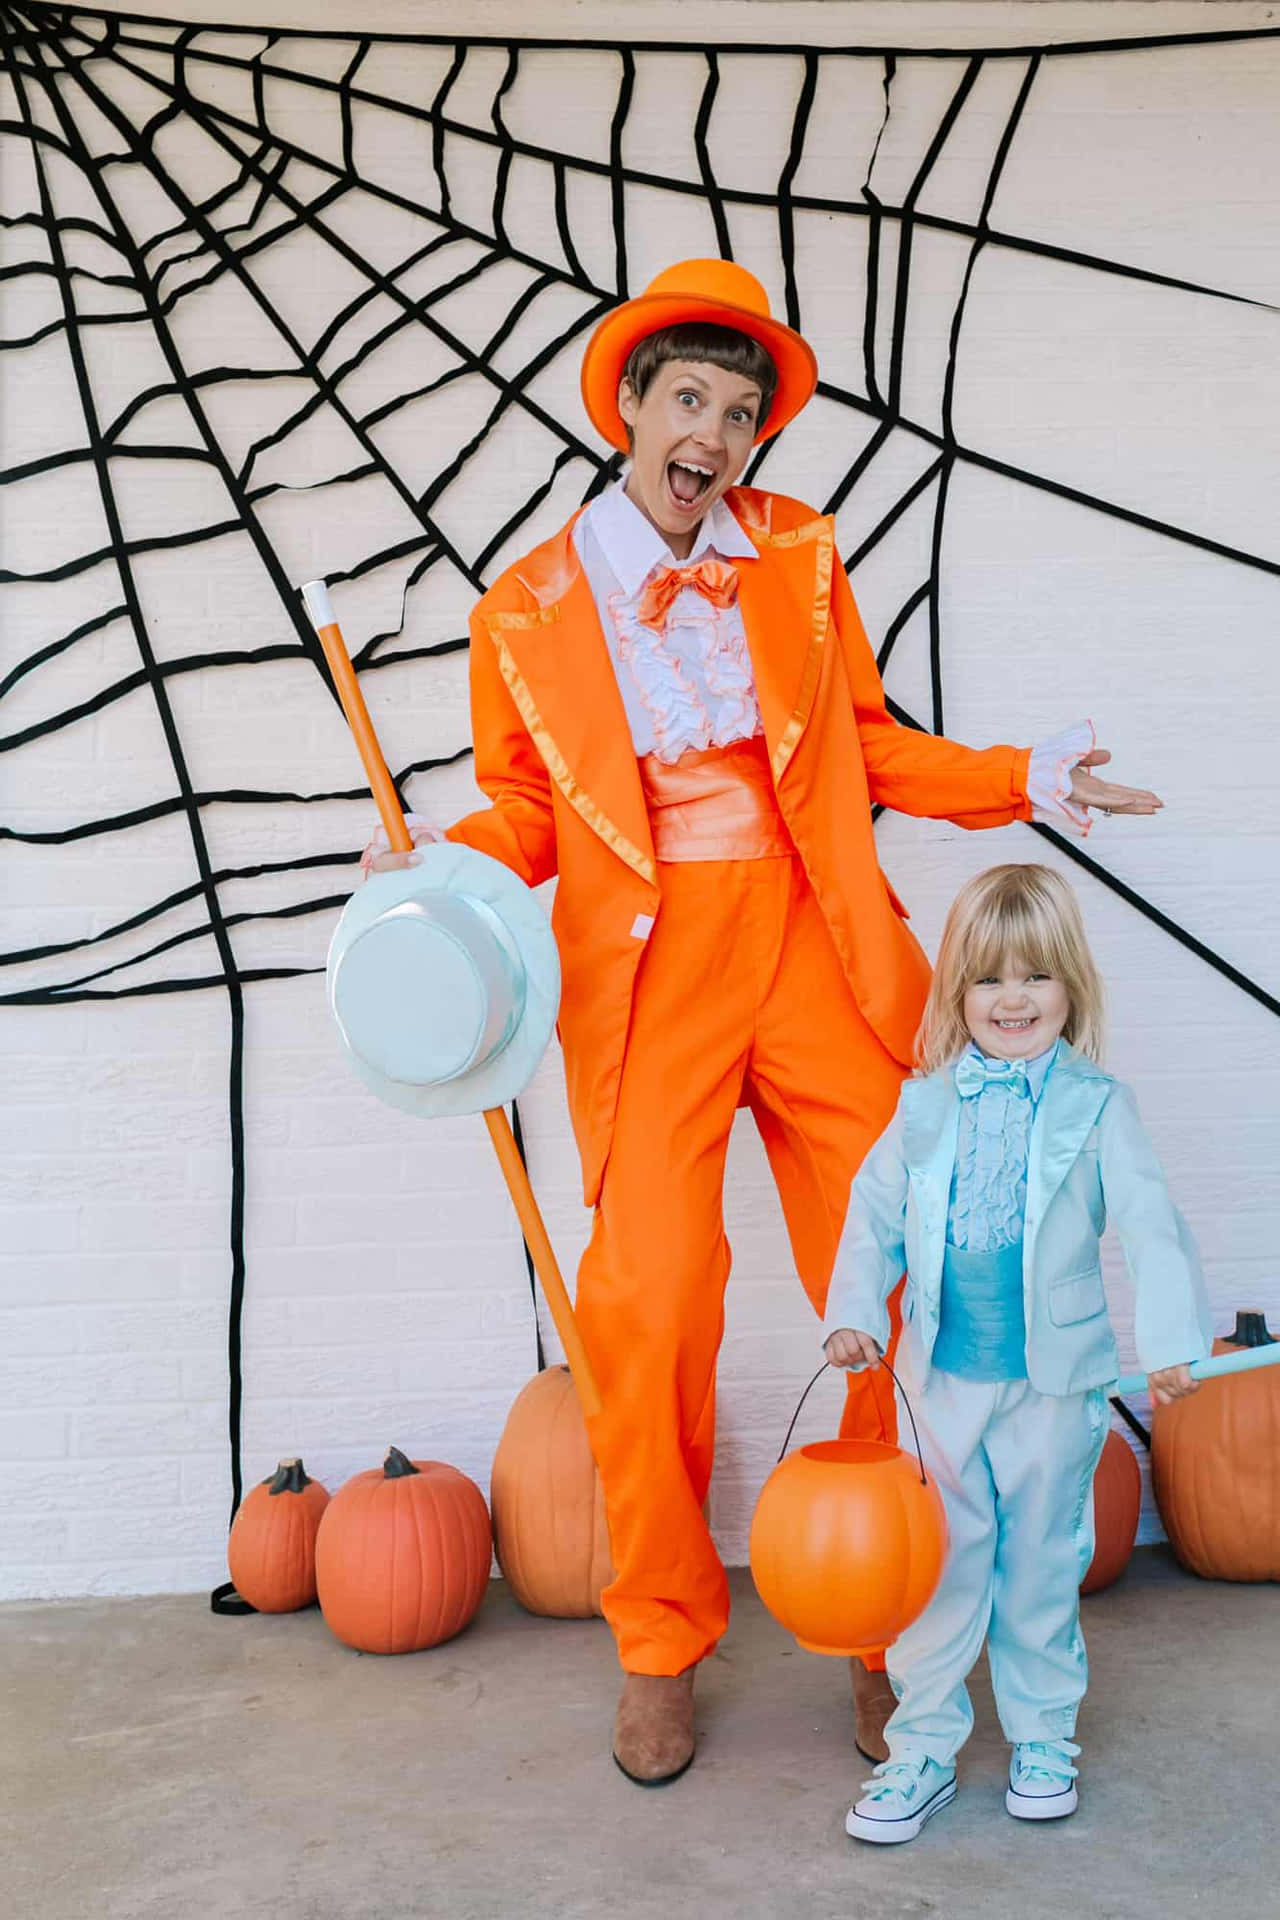 A Man And A Child Dressed In Orange Costumes